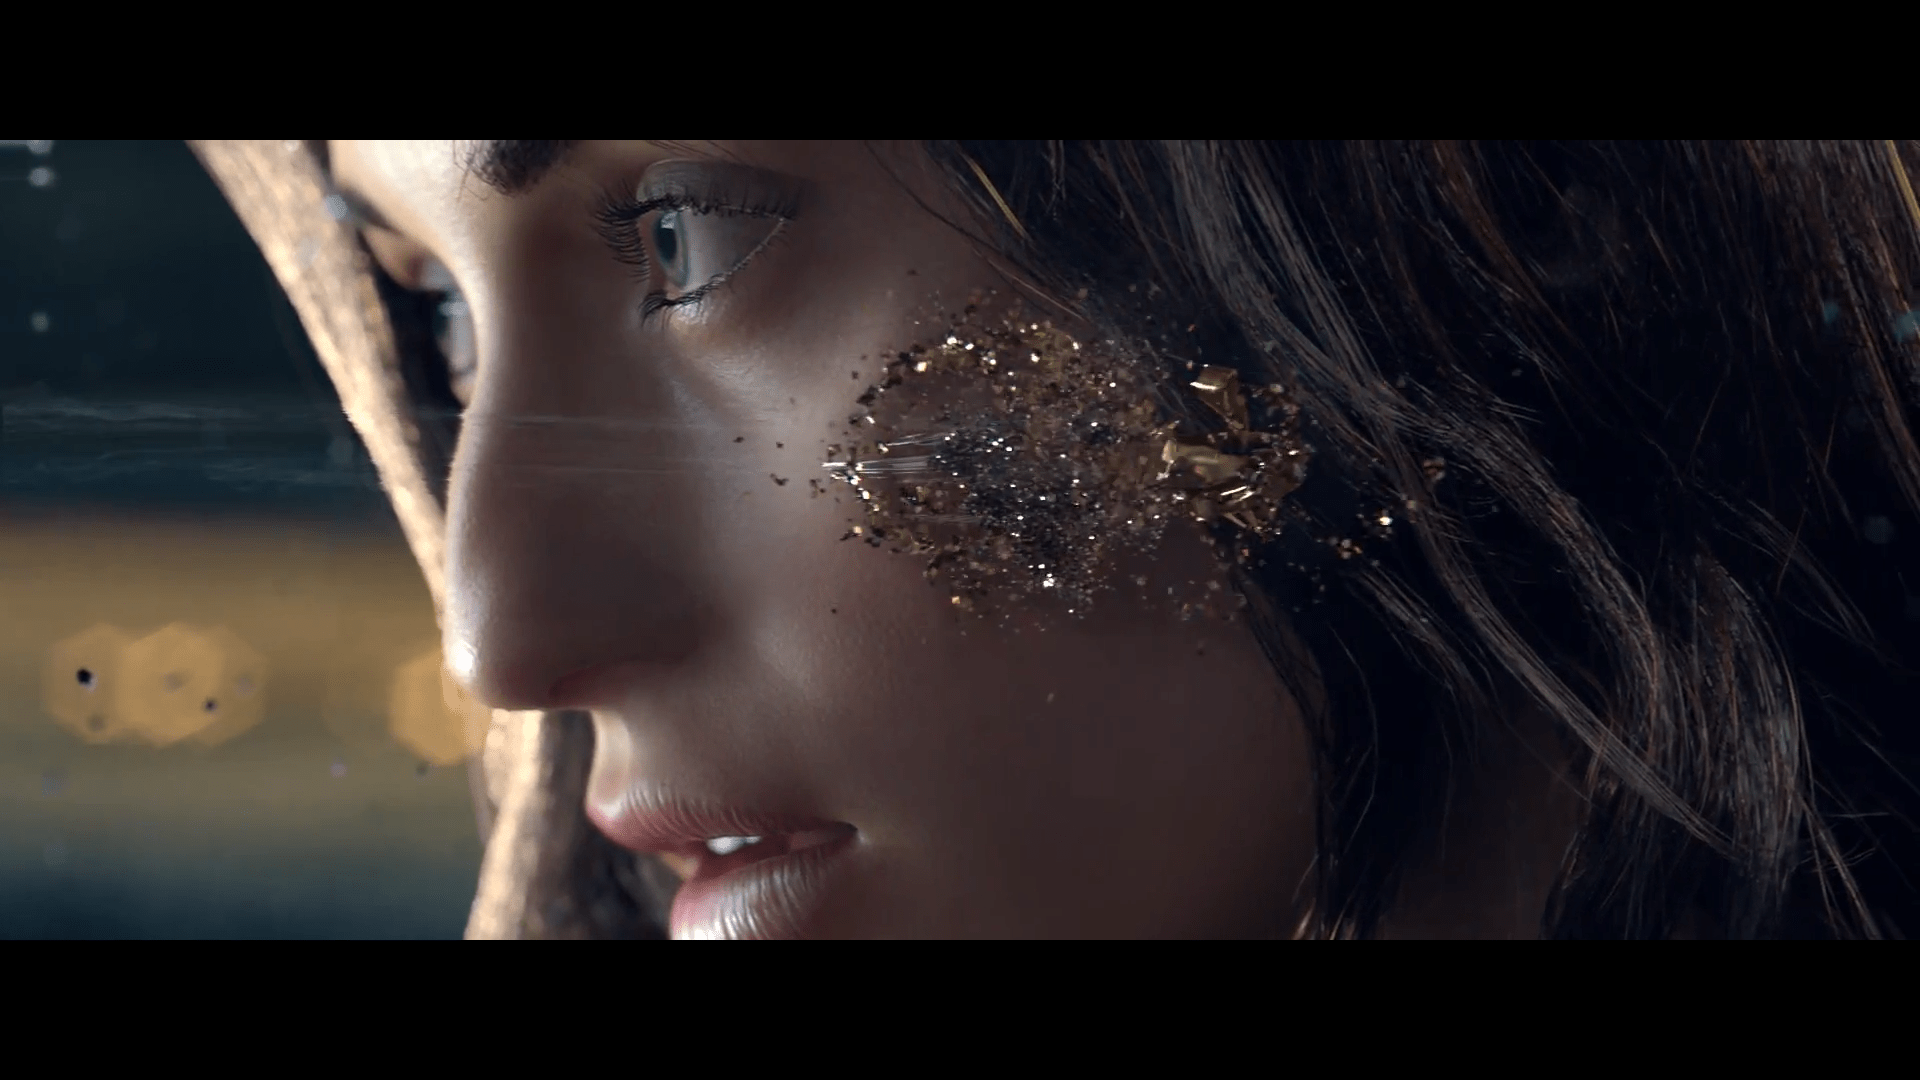 Cyberpunk 2077 may well be 'bigger' than Witcher but not in